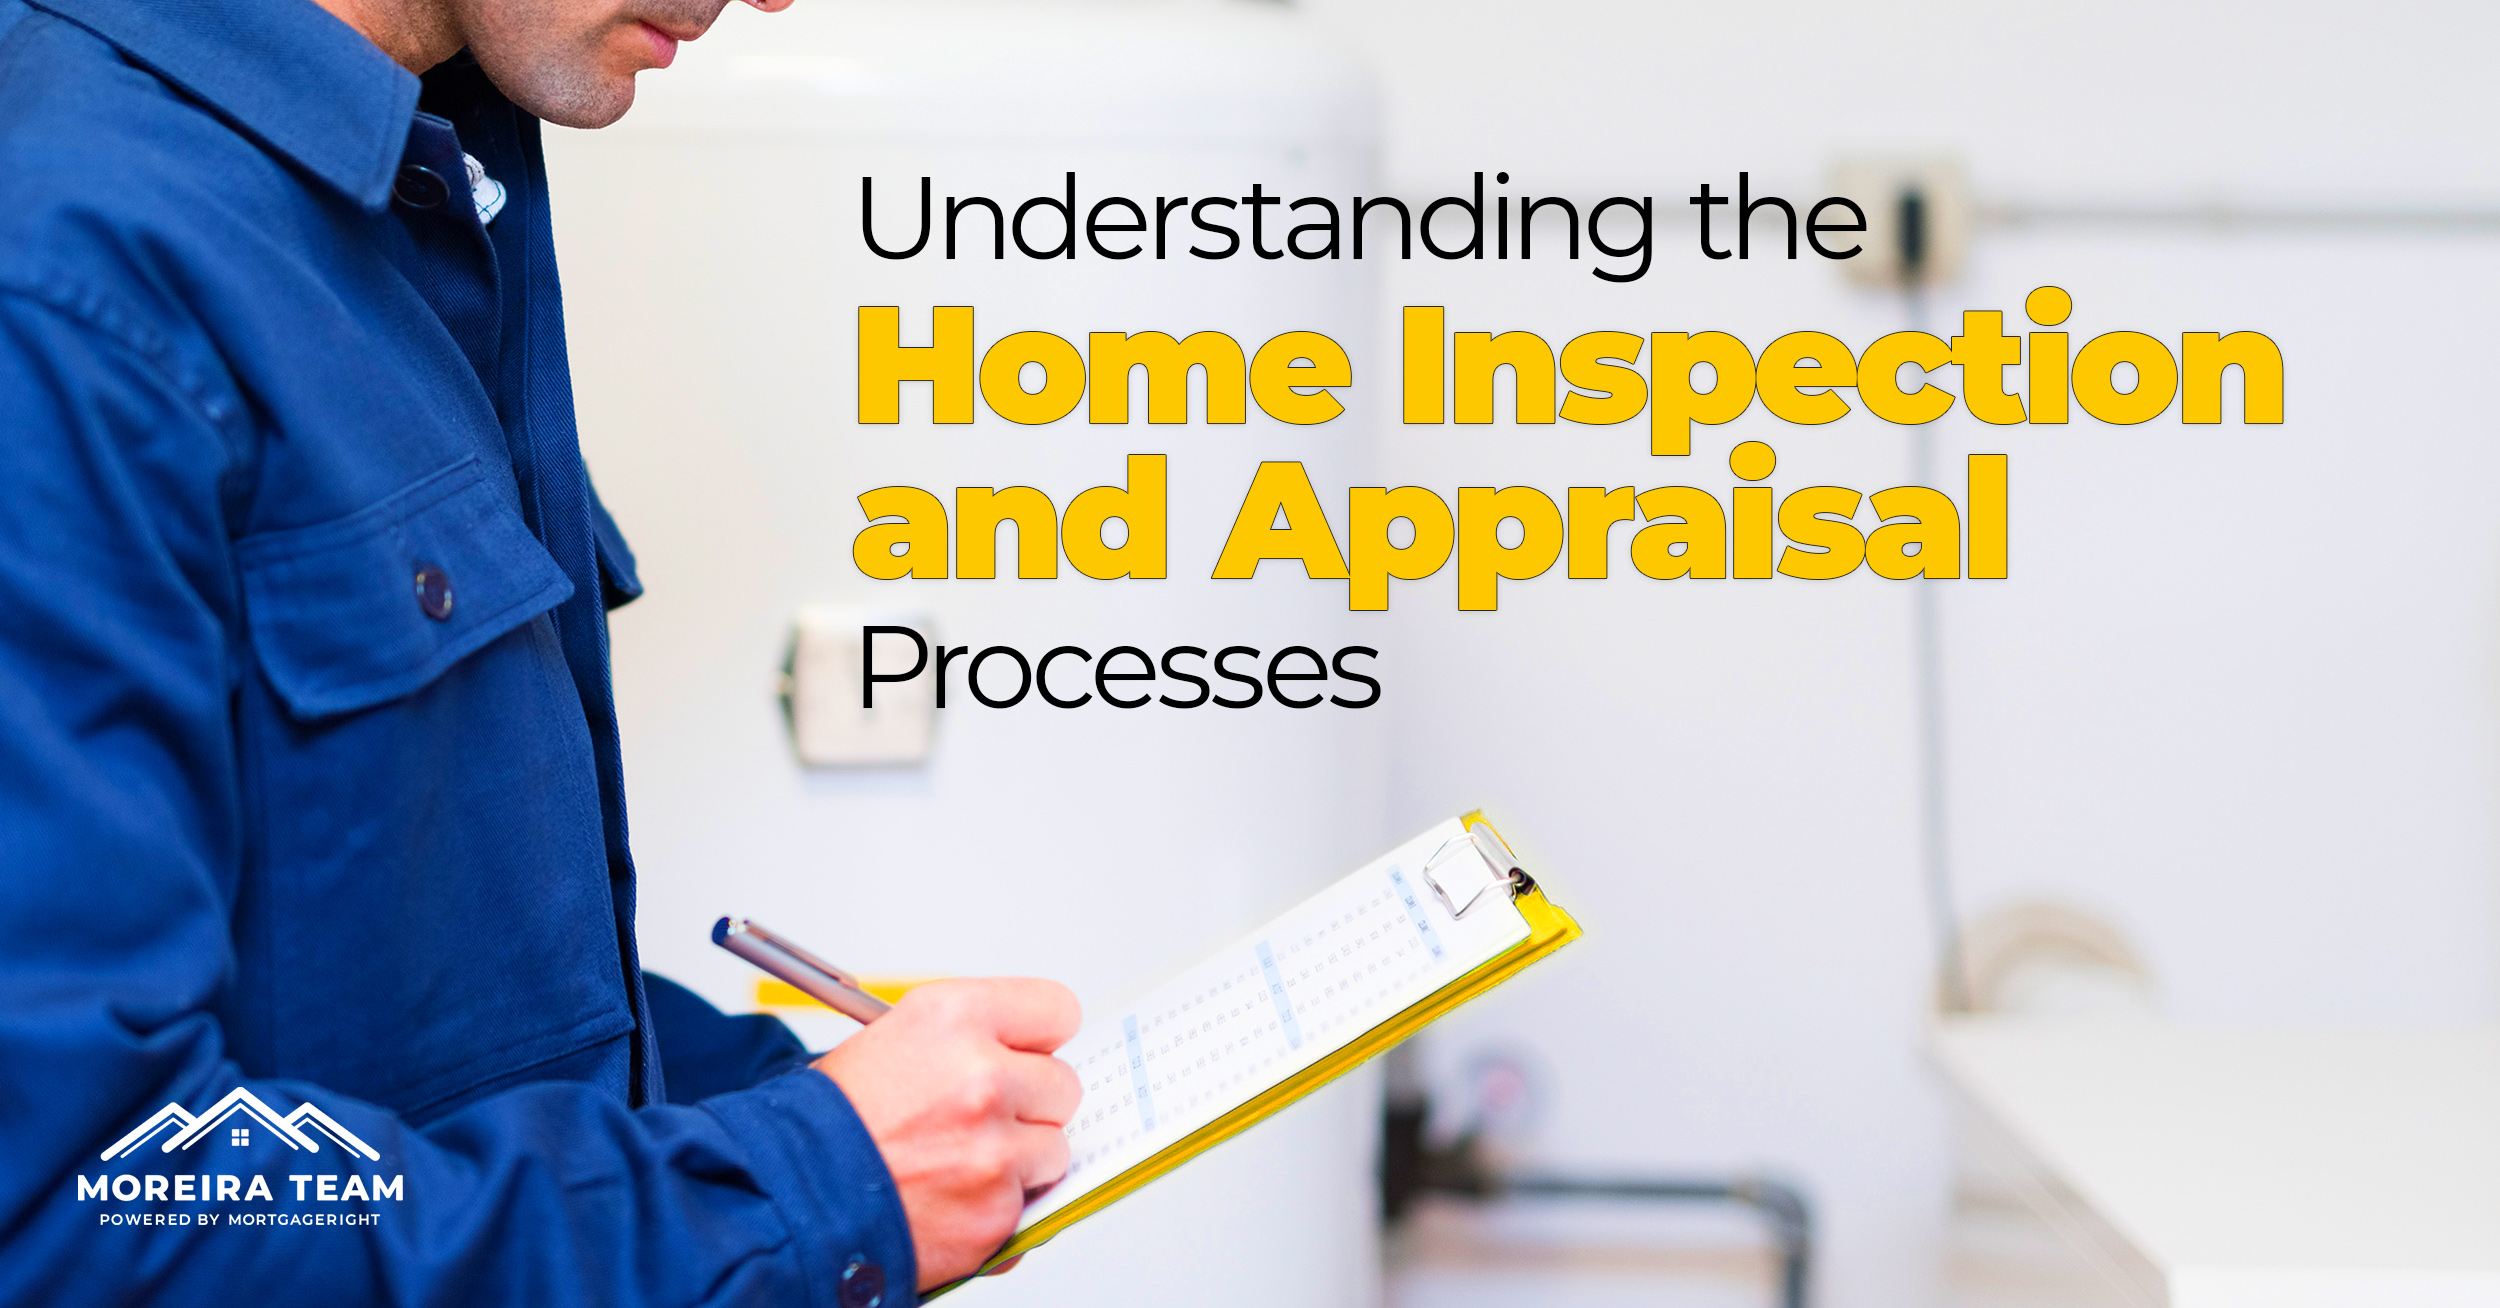 Understanding the Home Inspection and Appraisal Processes